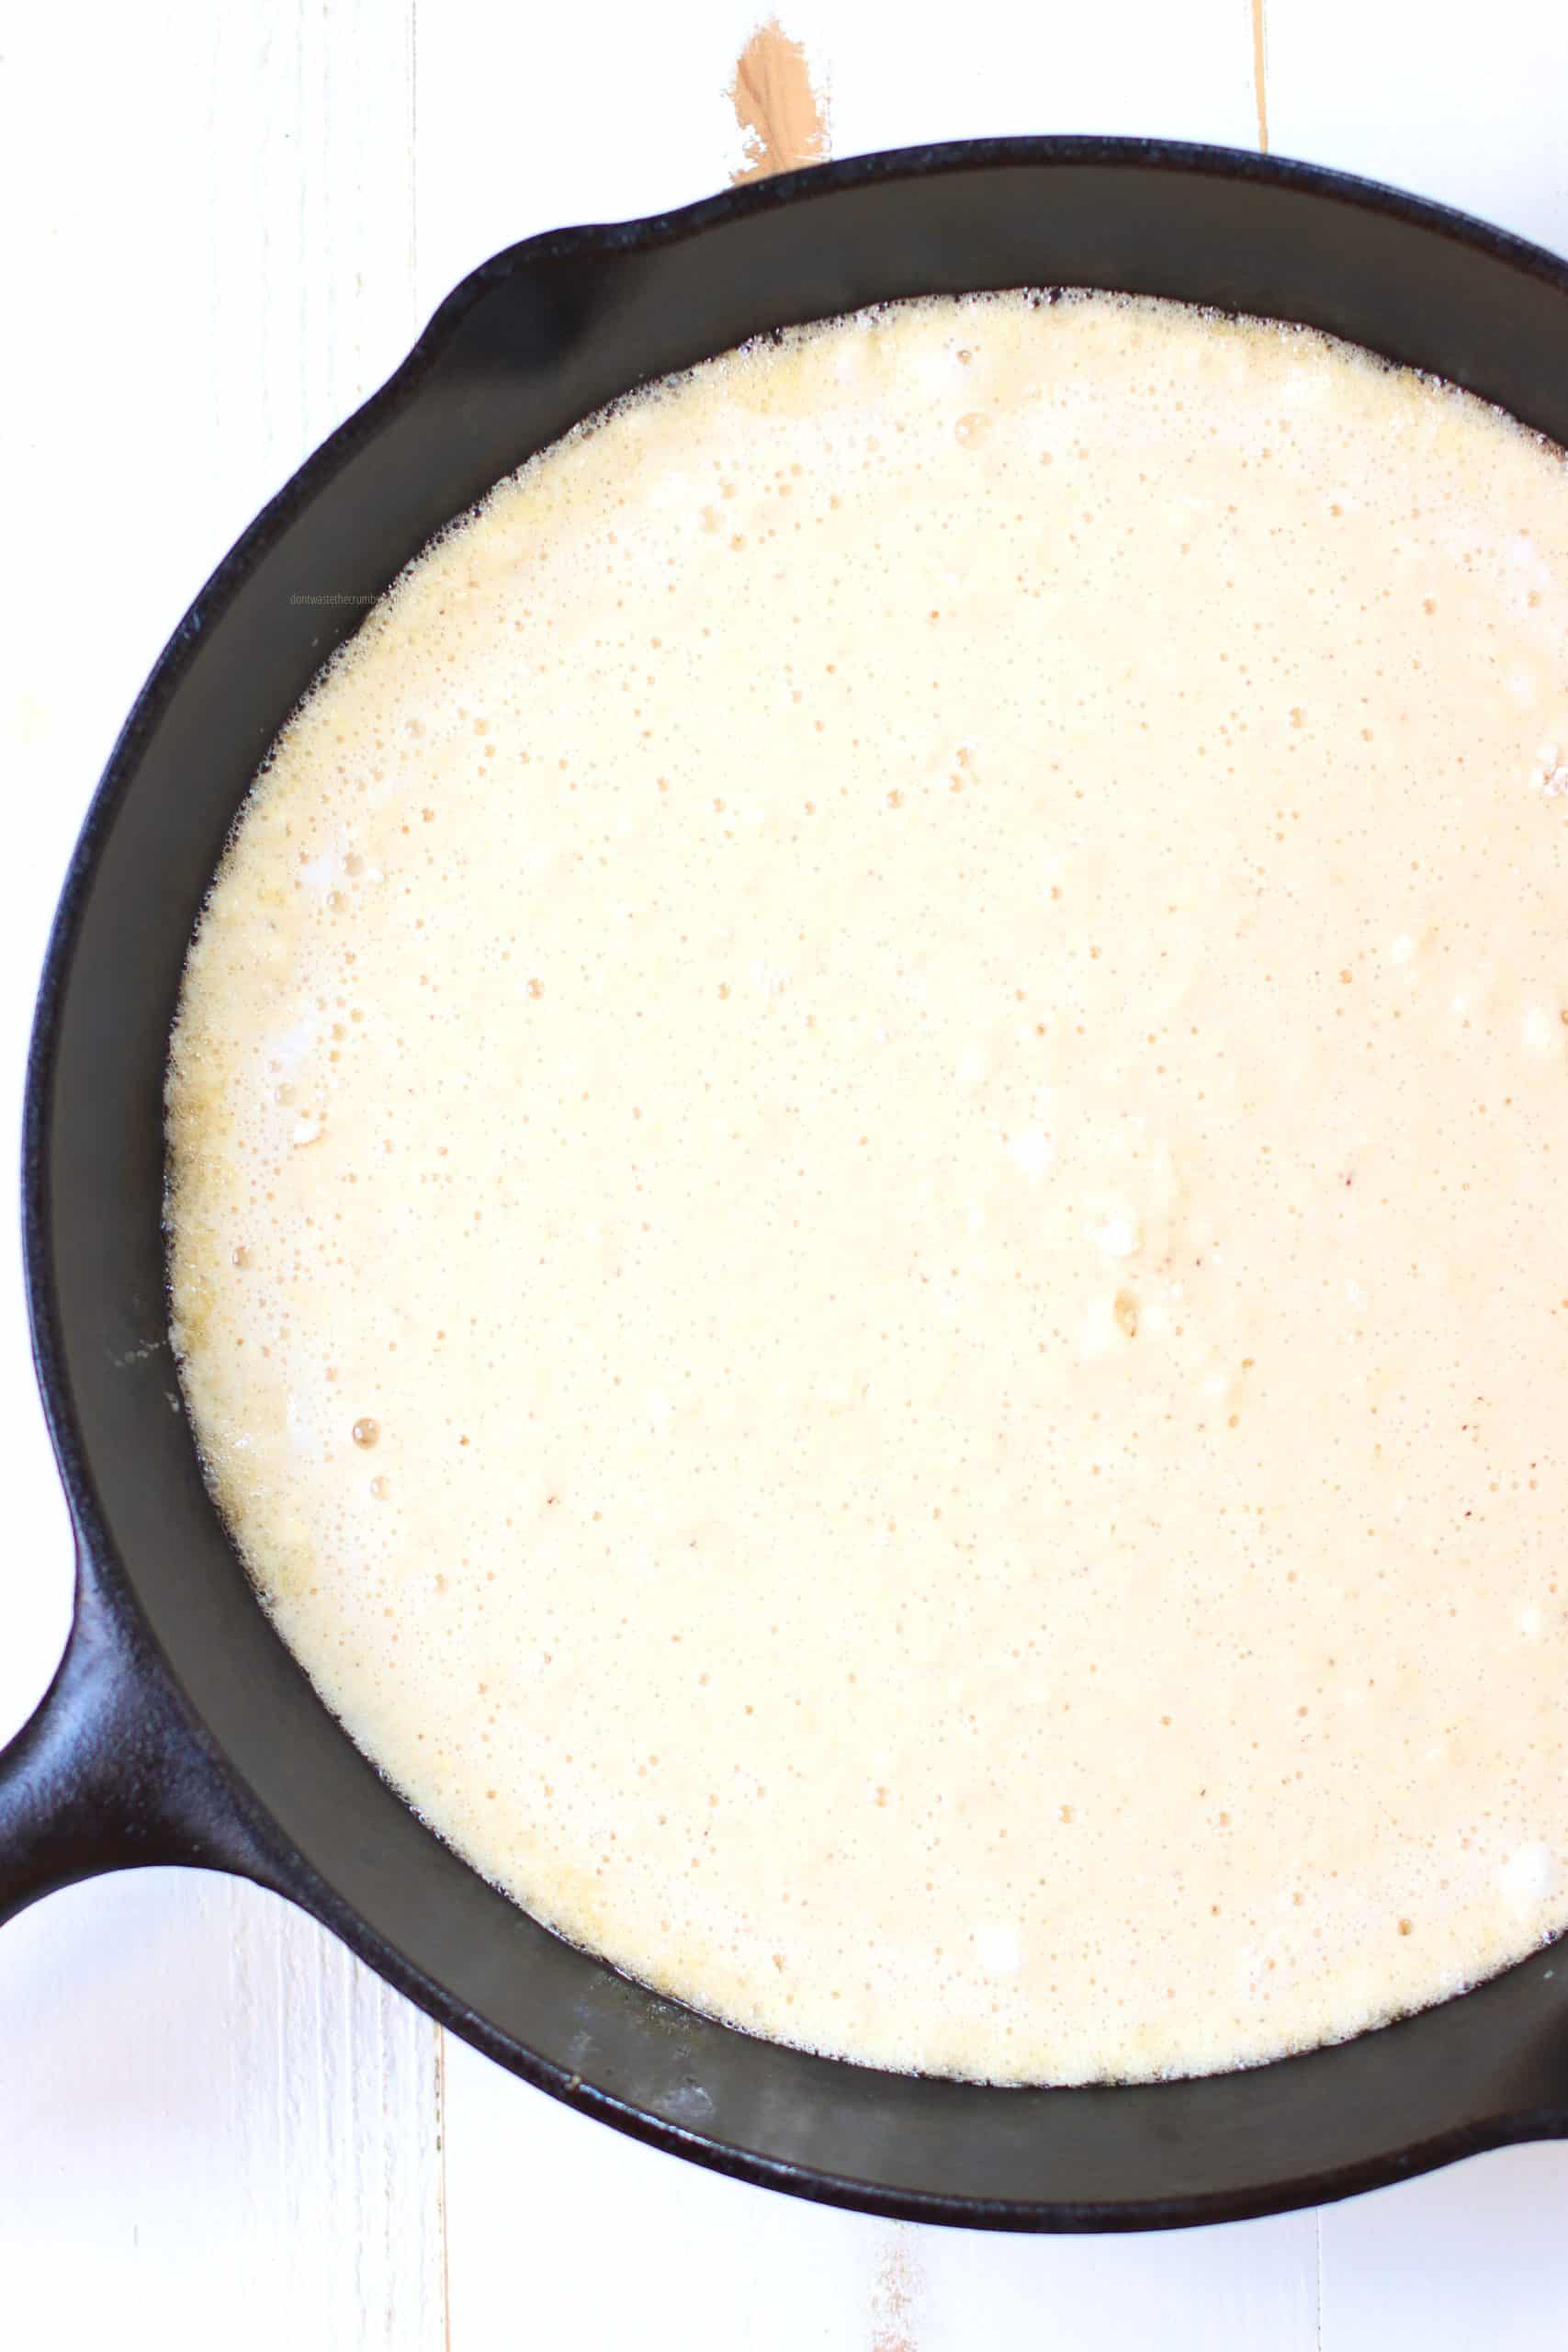 Cornbread batter cooking in a hot cast iron skillet